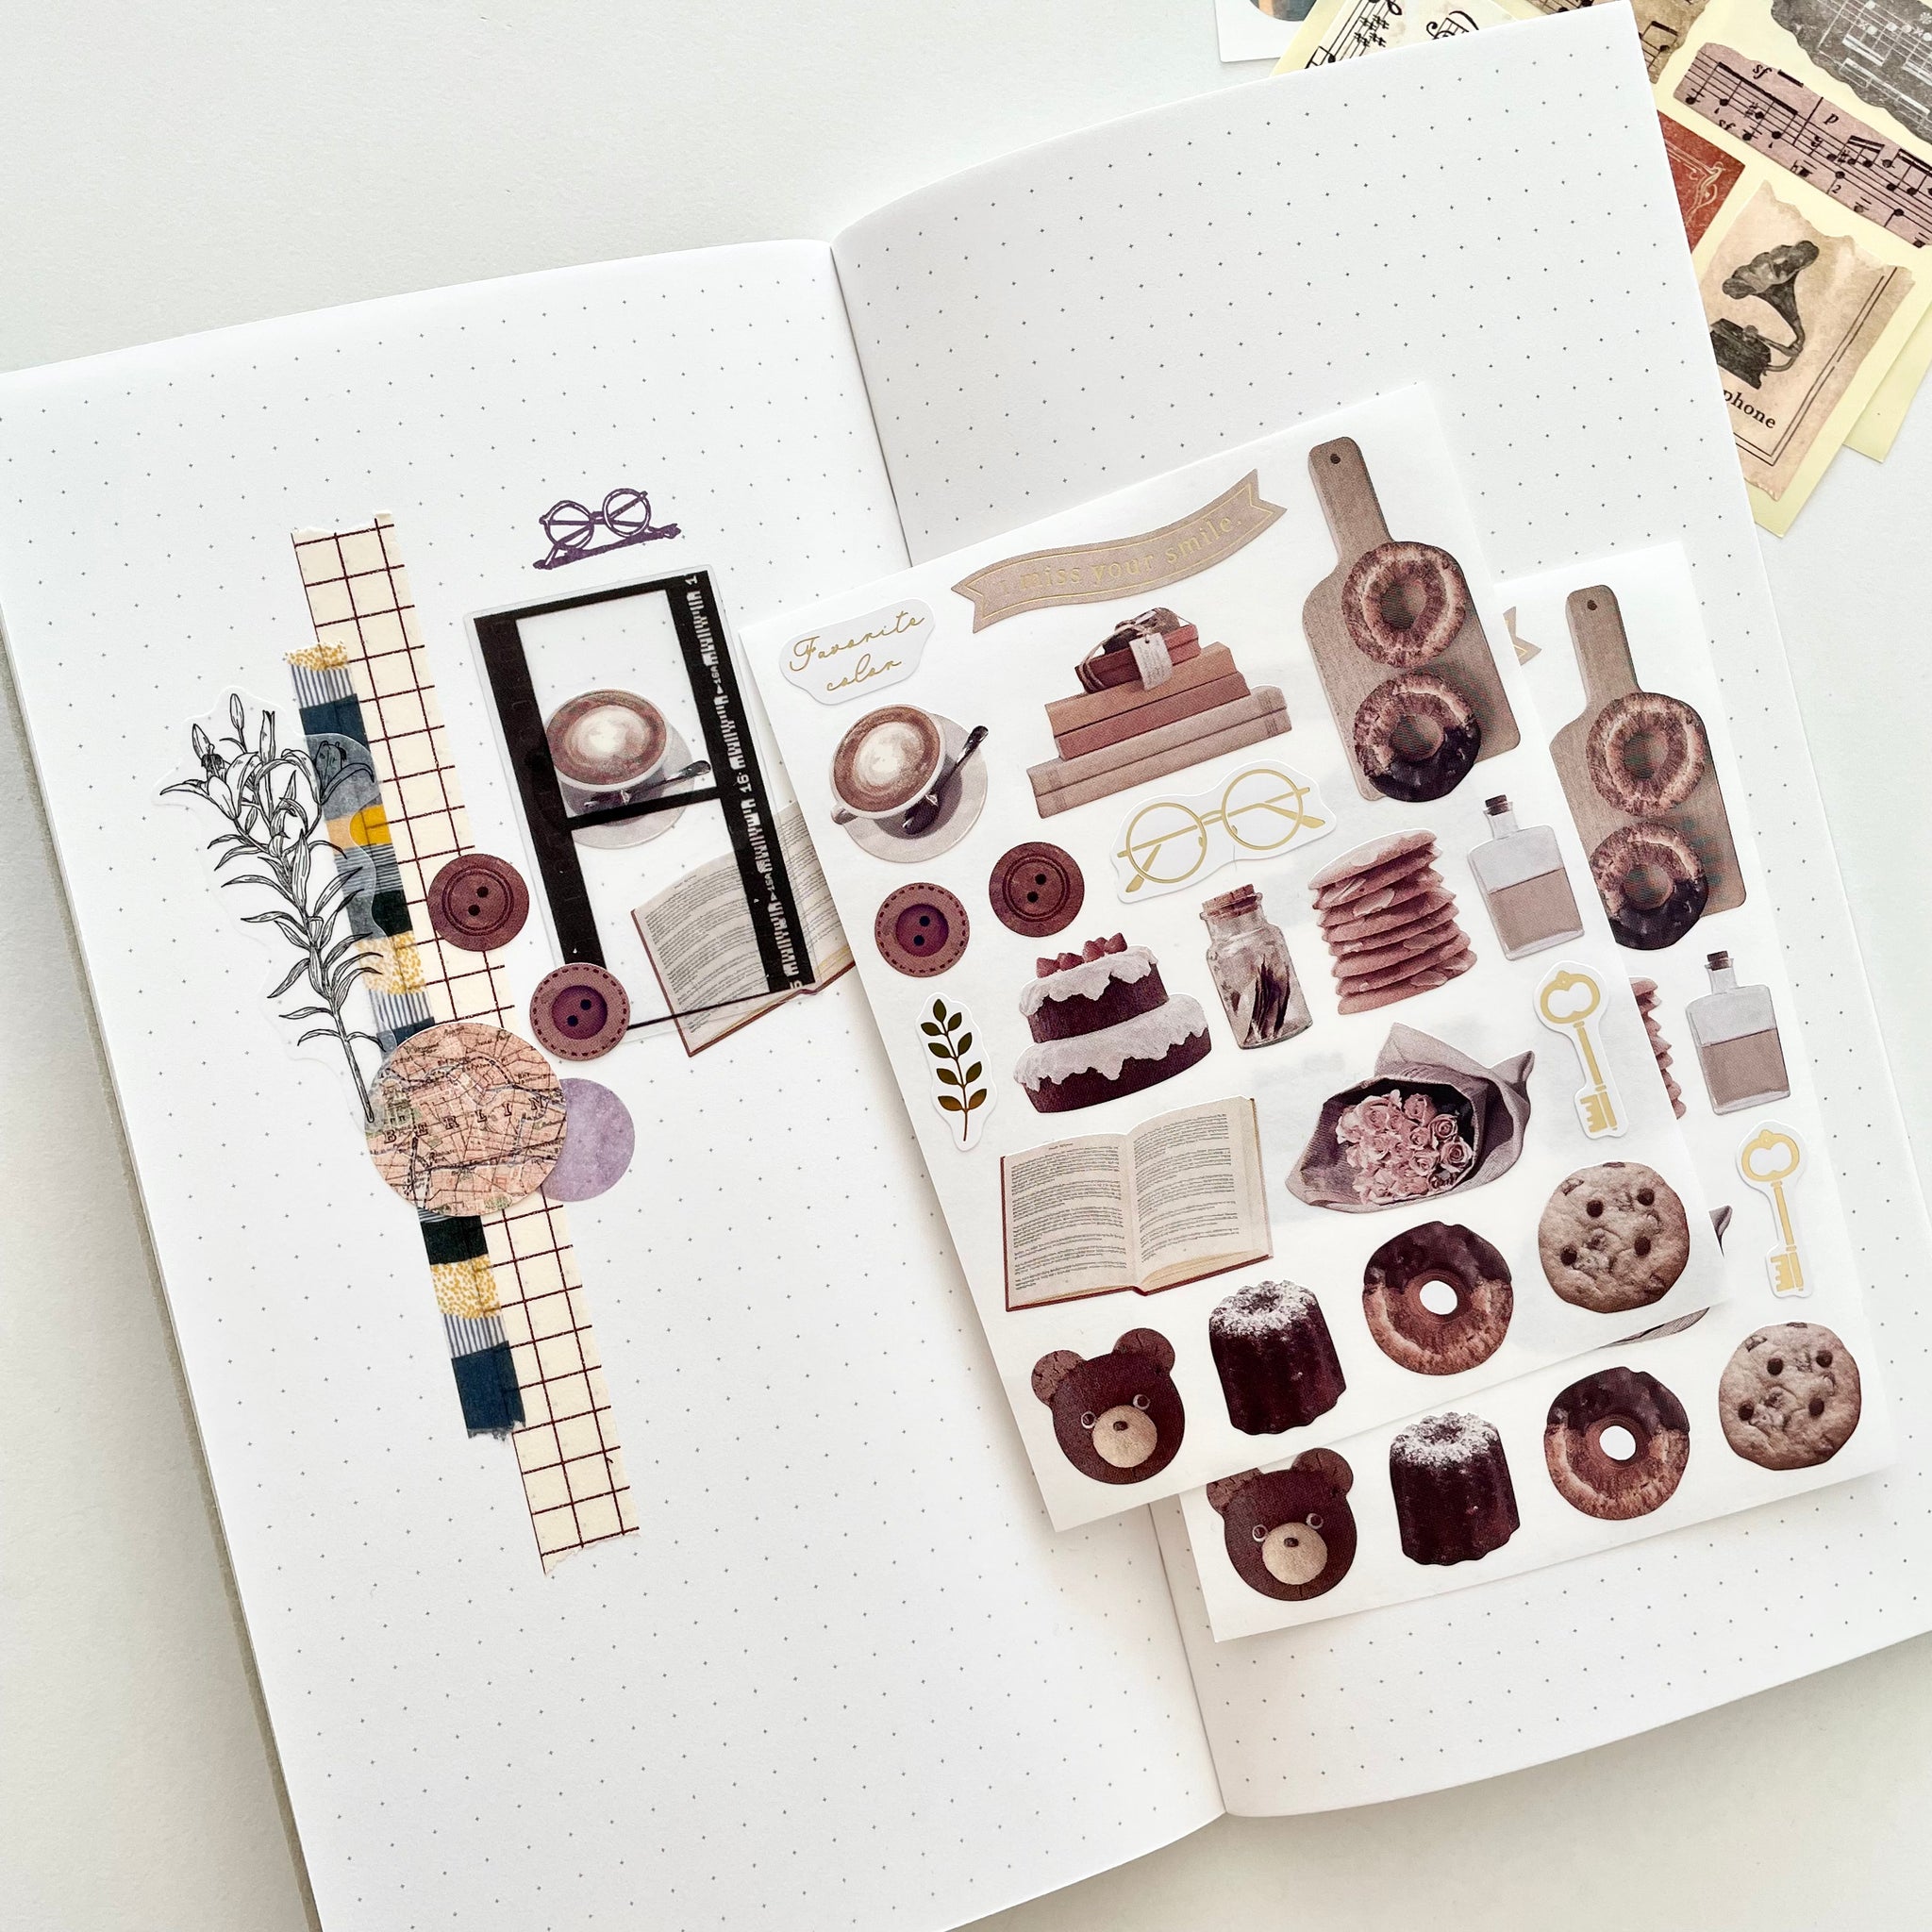 Die Cut Seal / Filter Photo Chocolate (2 sheets)